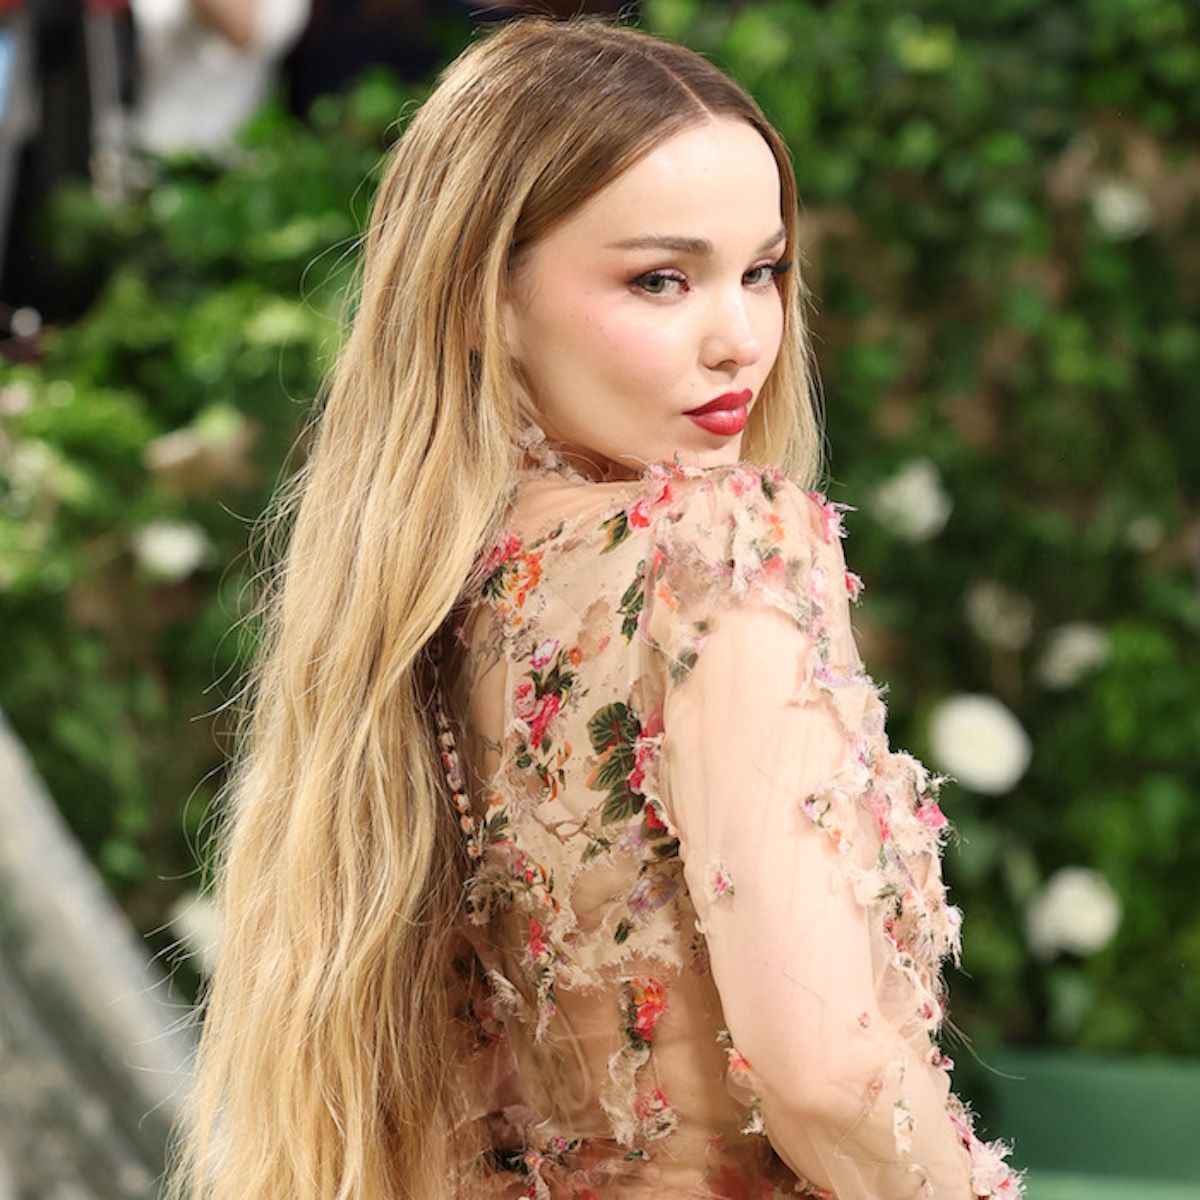 These Celebs Attended the Met Gala With Long, Fairytale-Inspired Hair—Now I'm Canceling My Haircut